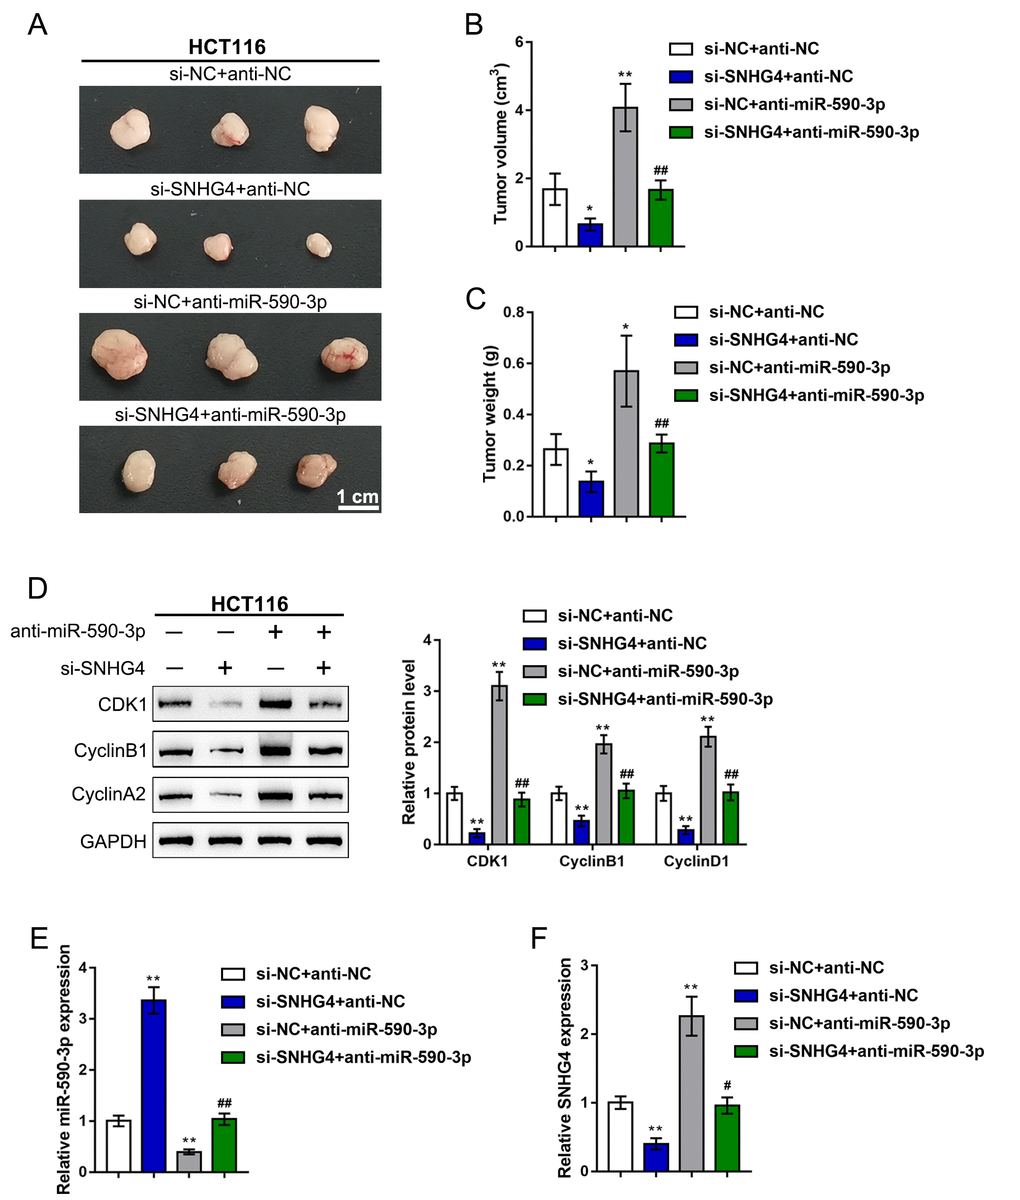 In vivo effects of the SNHG4/miR-590-3p axis on subcutaneously transplanted tumor growth. A subcutaneous transplantation tumor model was established in nude mice, and the mice were divided into four groups: si-NC + anti-NC group, si-SNHG4 + anti-NC group, si-NC + anti-miR-590-3p group, and si-SNHG4 + anti-miR-590-3p group. The mice received subcutaneous injections according to their group. (A–C) At day 35 of injection, the tumor size (A) was measured, the tumor volume (B) was calculated, and the tumor weight (C) was measured. (D) The protein levels of CDK1, cyclinB1, and cyclinA2 in the tumor samples were determined by immunoblotting. (E) The expression level of miR-590-3p was determined by PCR assay. (F) The expression level of SNHG4 was detected by PCR assay. *P **P ##P 